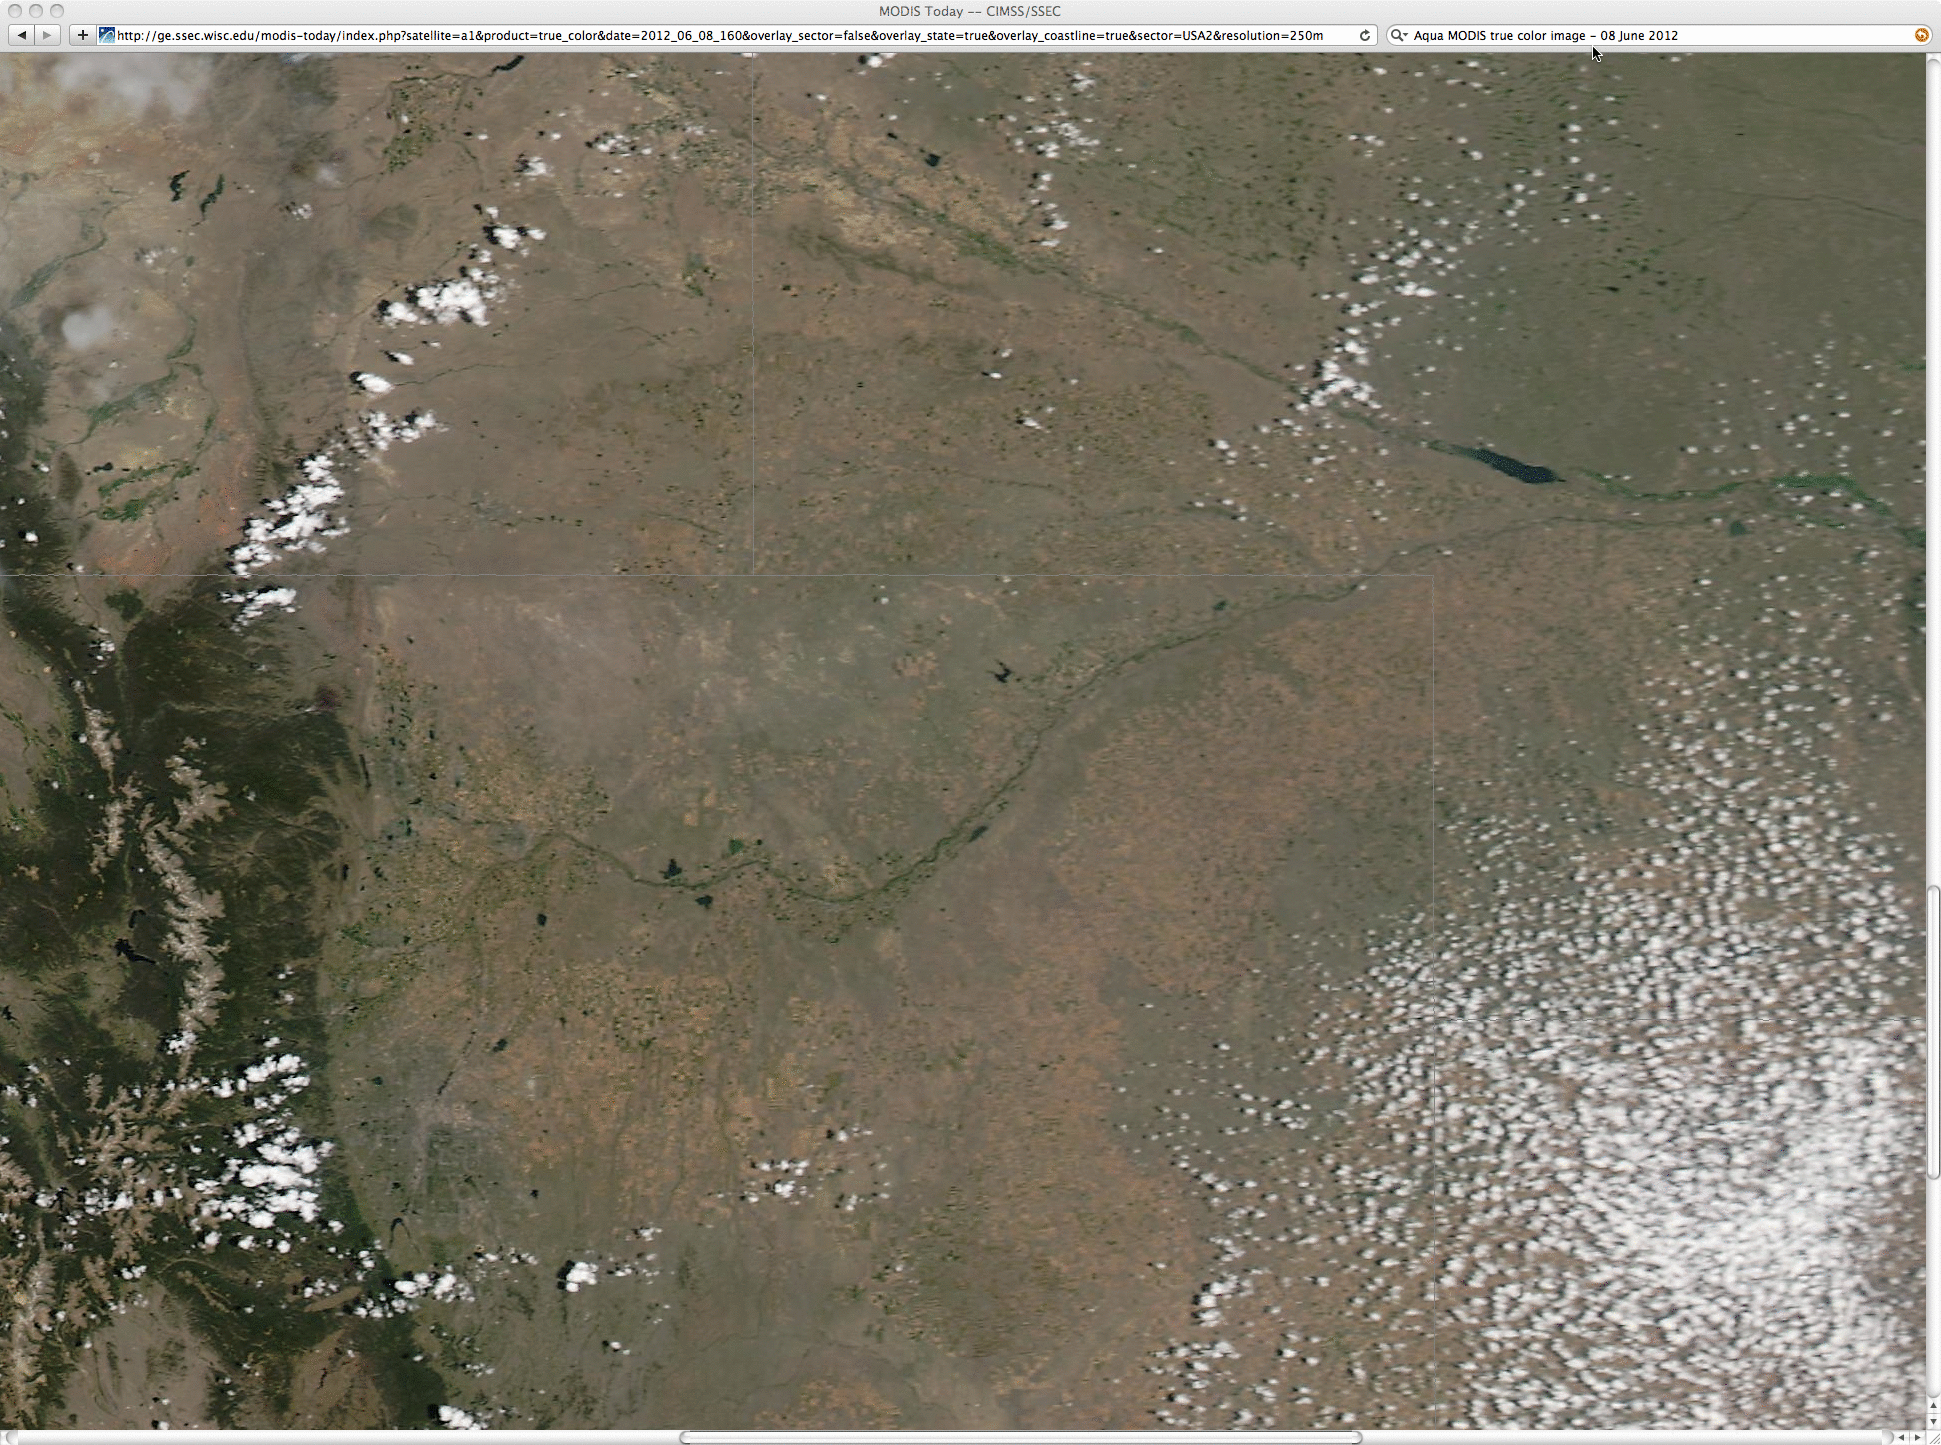 MODIS true color and false color RGB images from 08/09/10/11 June